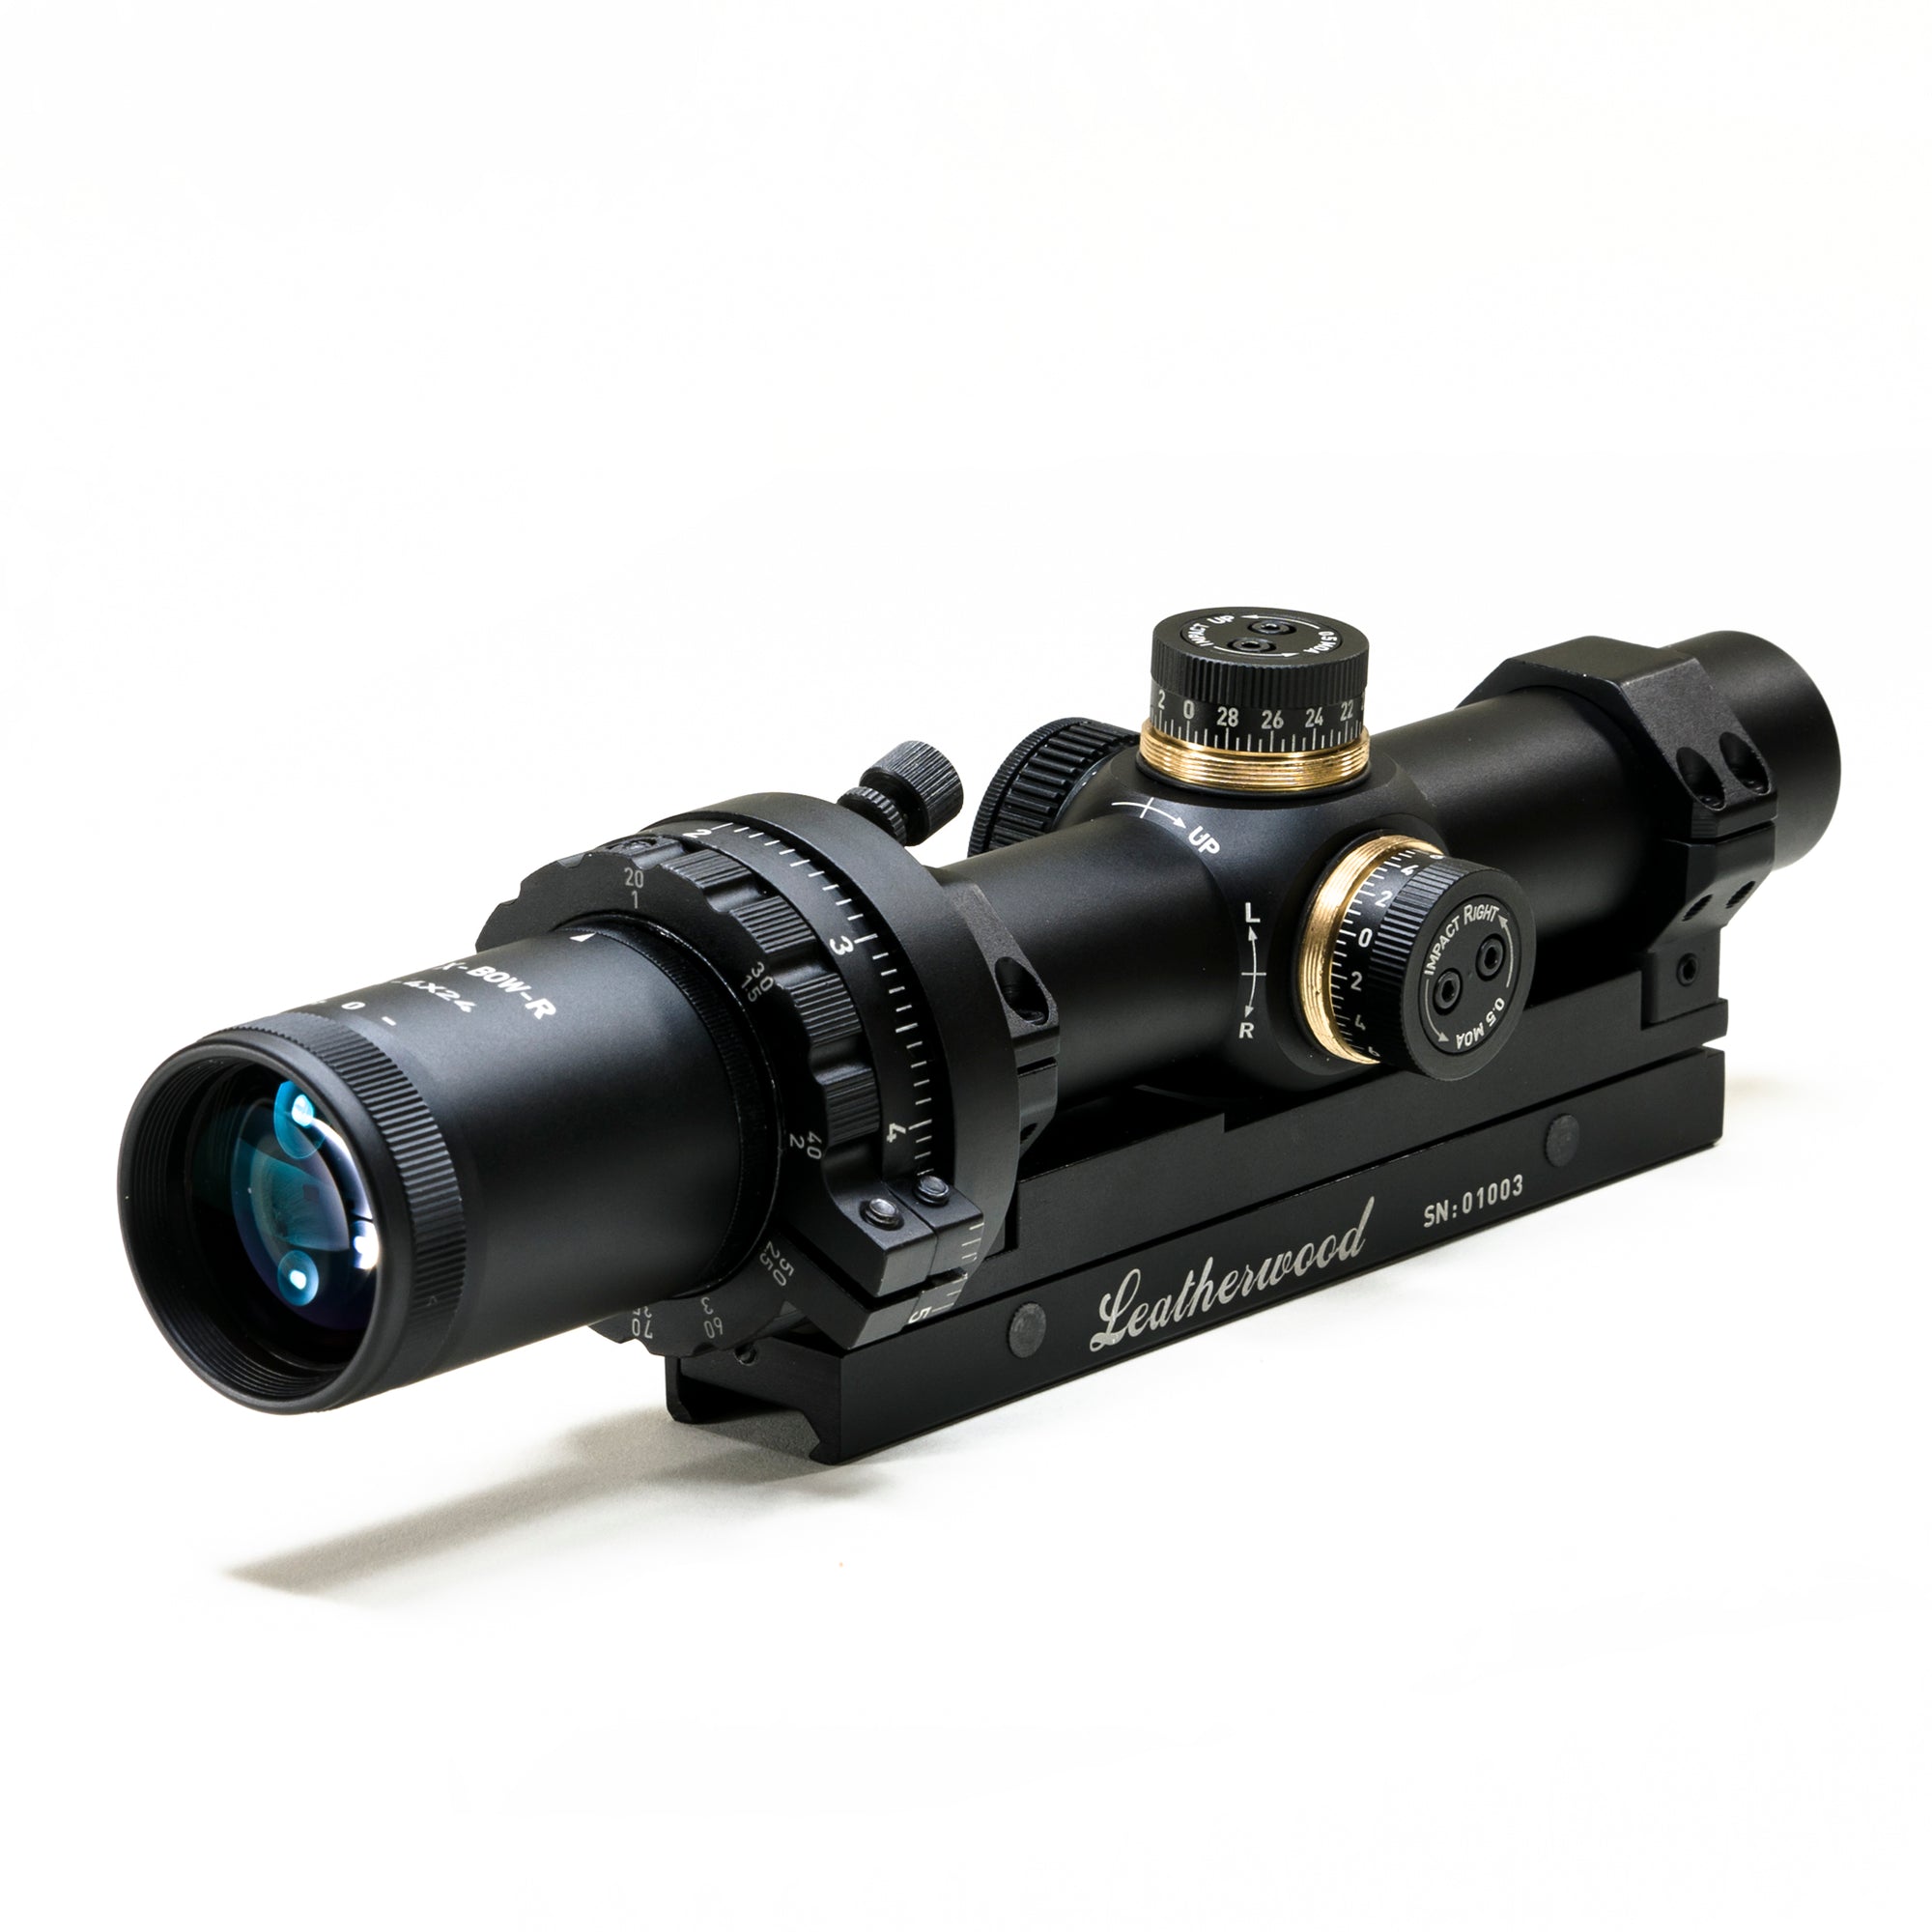 ART X-BOW Crossbow Scope Side Angle View Eyepiece